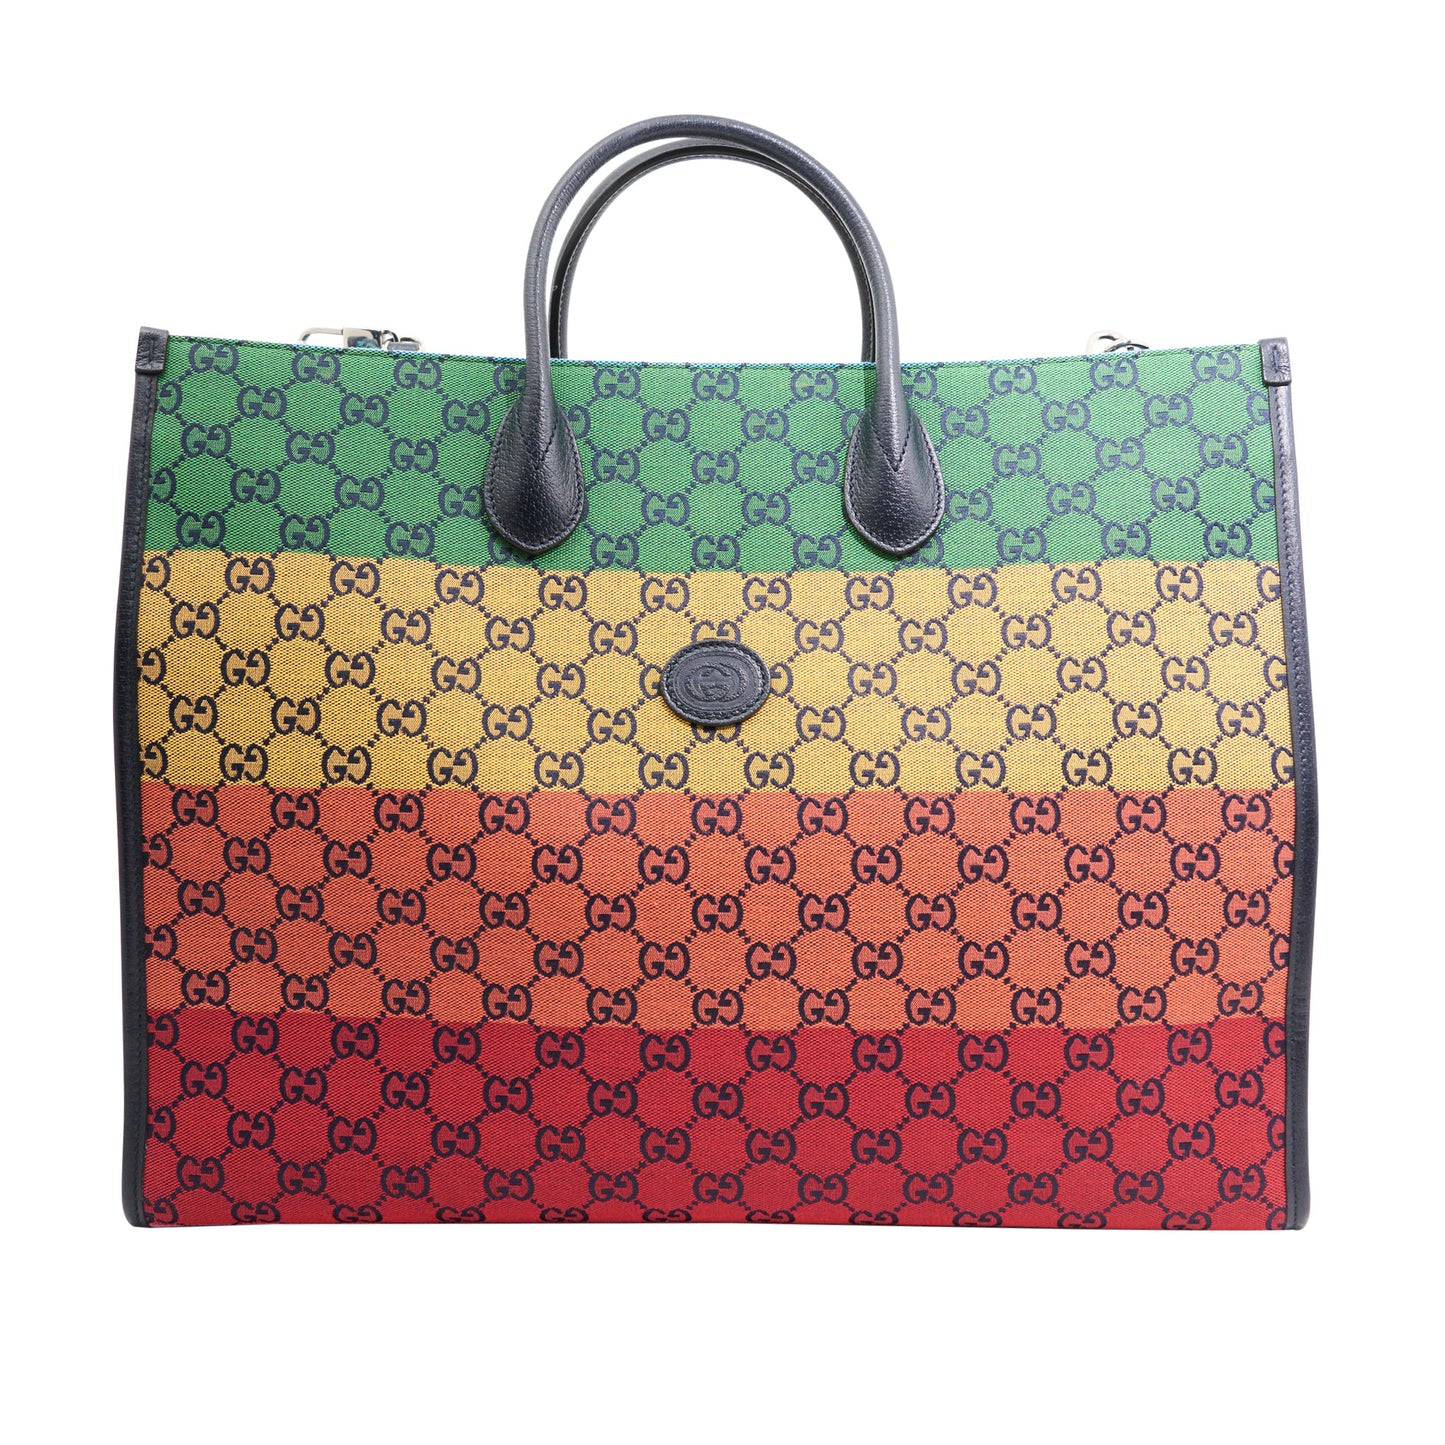 Gucci Canvas Rainbow GG Large Tote in Rainbow Monogram